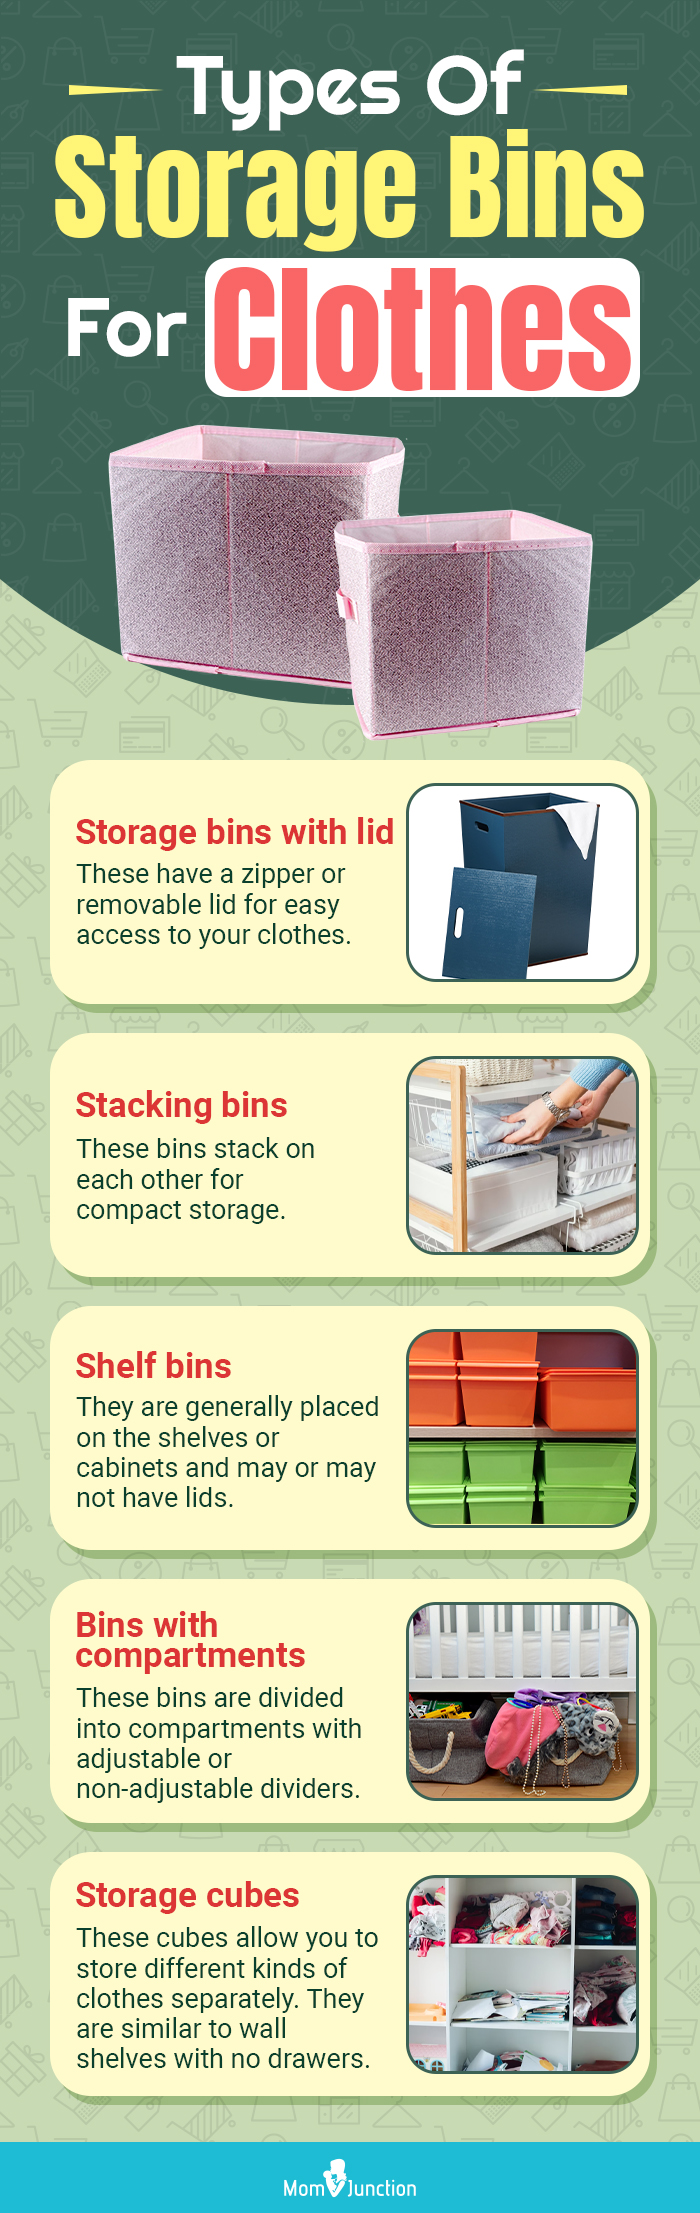 https://www.momjunction.com/wp-content/uploads/2023/02/Types-Of-Storage-Bins-For-Clothes.jpg